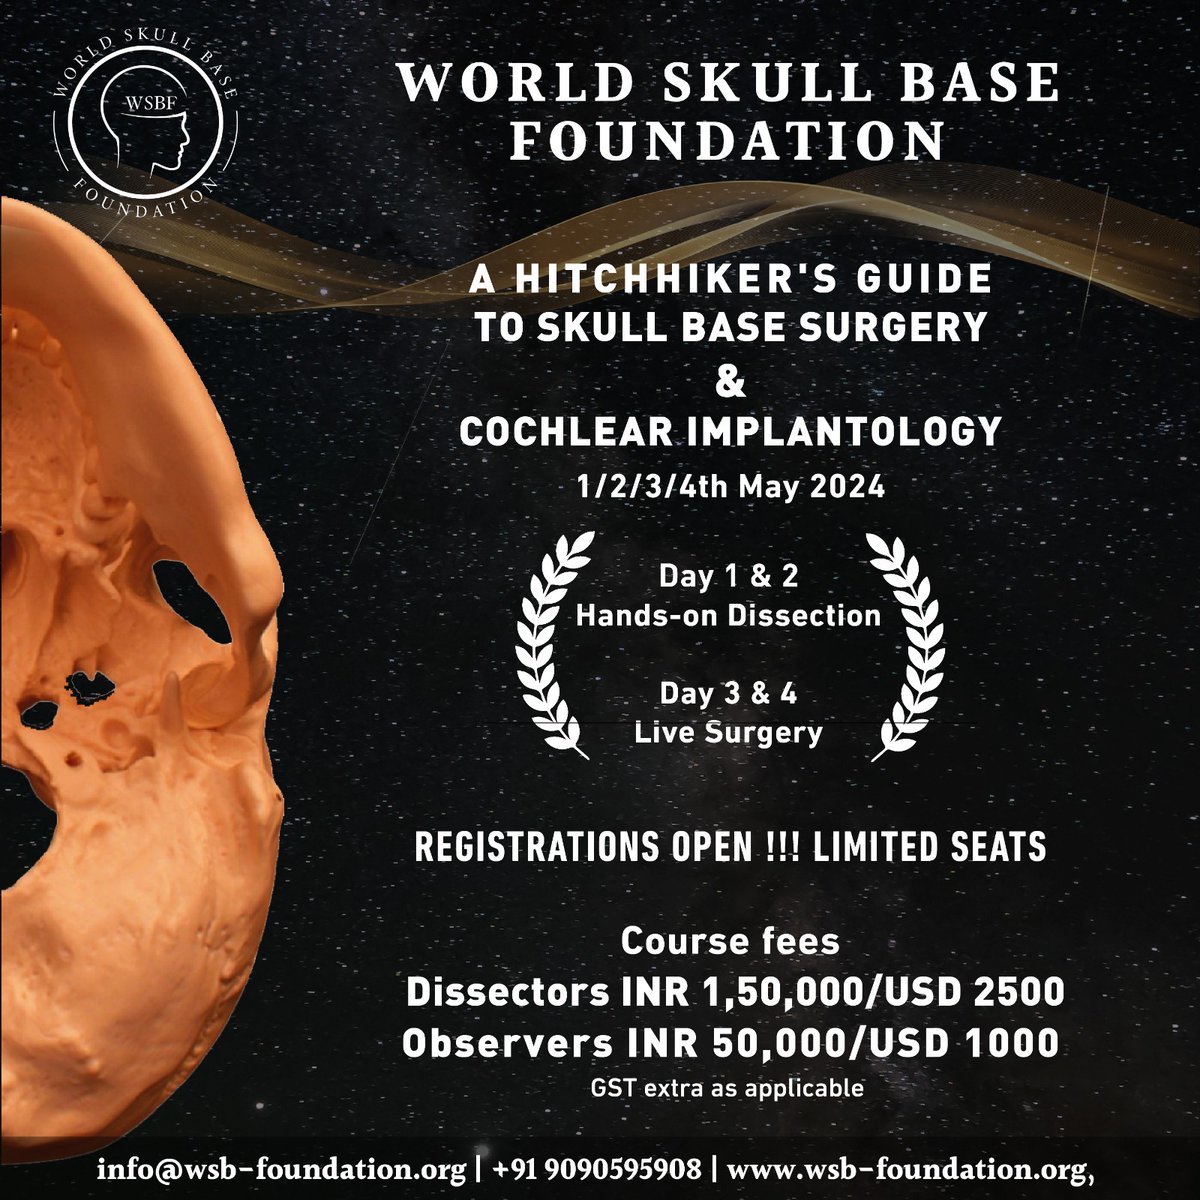 'Exploring the Art of Dissection and Live Surgery' Hurry!!!! Register for the Hitchhikers' Guide to Skull Base Surgery & Cochlear Implantology 2024 !!! #worldskullbasefoundation #skullbase #skullbasesurgery #wsbf #fellow #dissector #learnskullbasesurgery #lateralskullbasesurgery